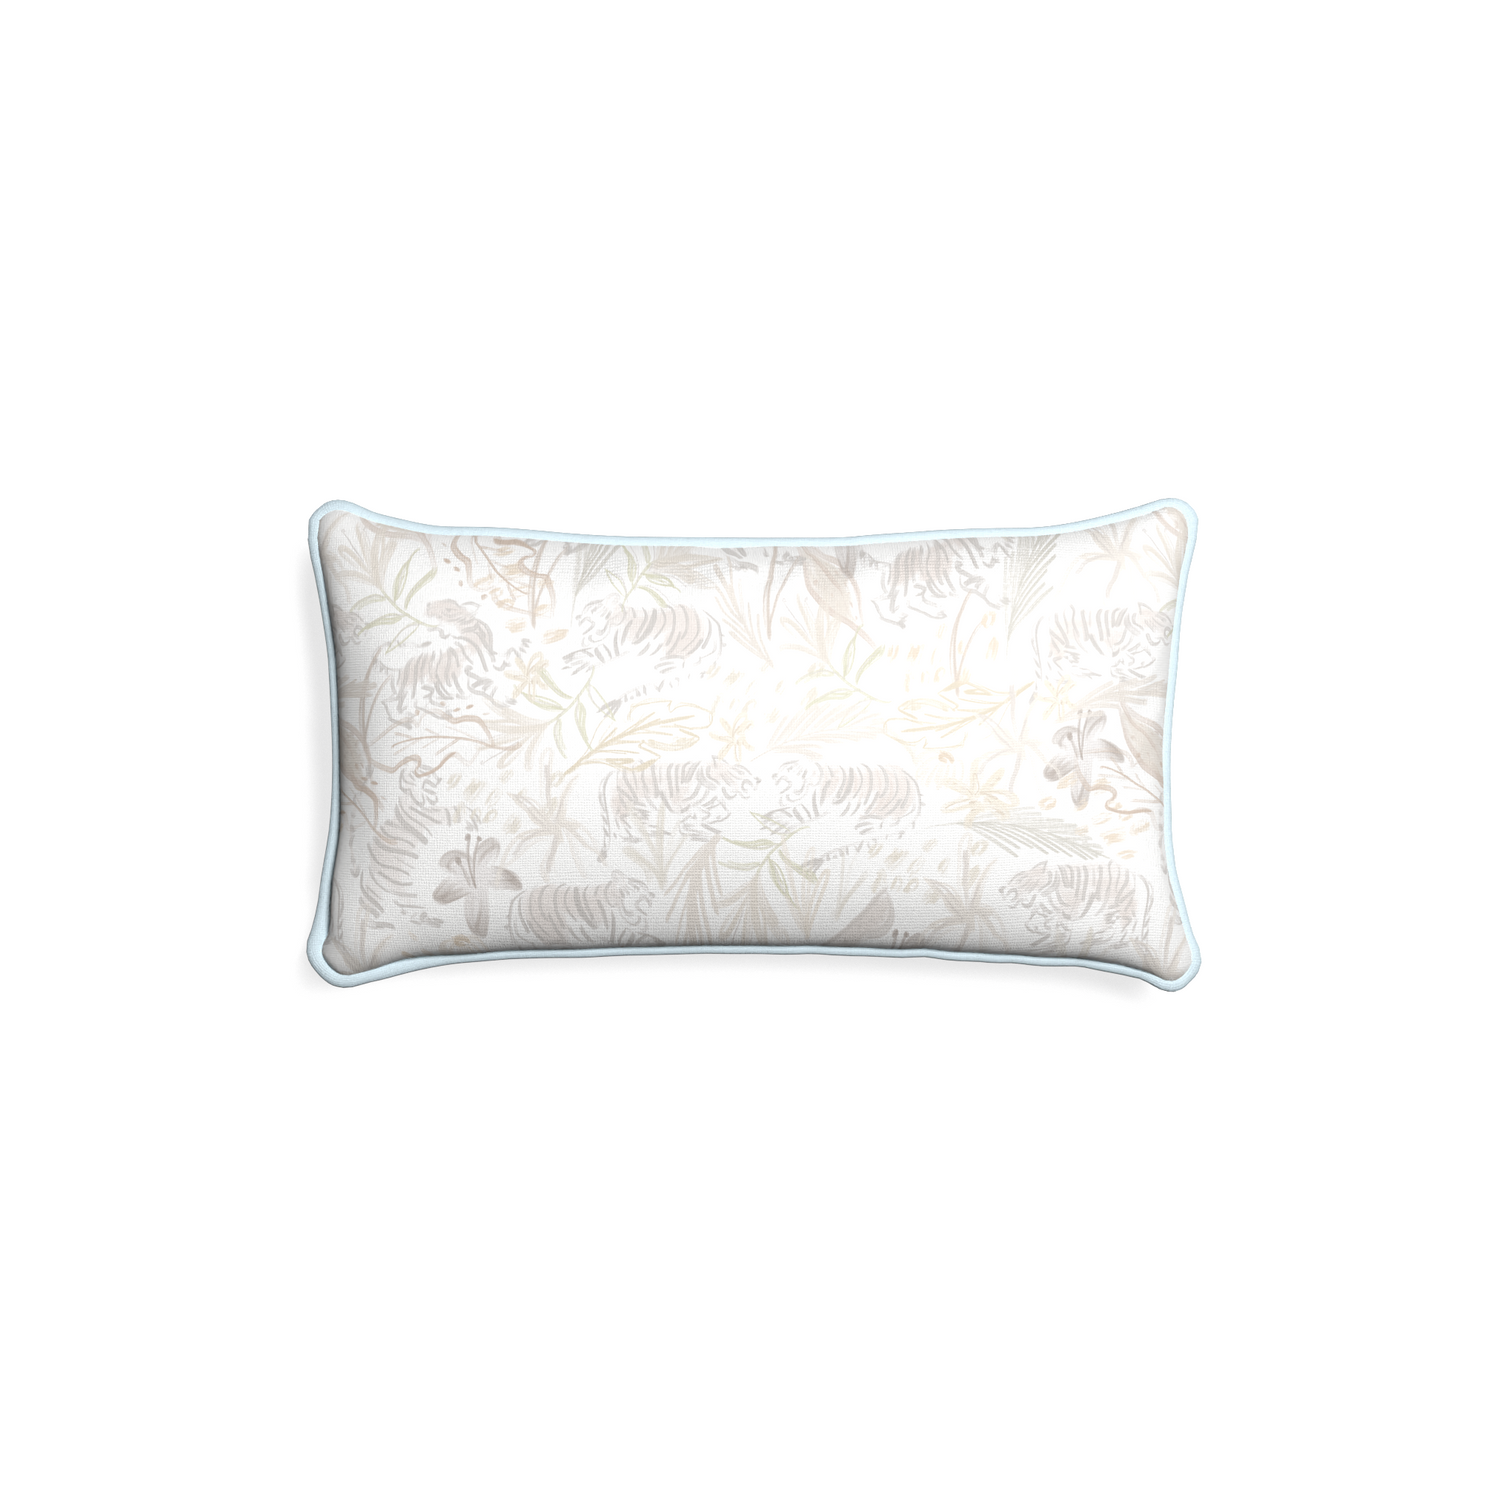 Petite-lumbar frida sand custom beige chinoiserie tigerpillow with powder piping on white background